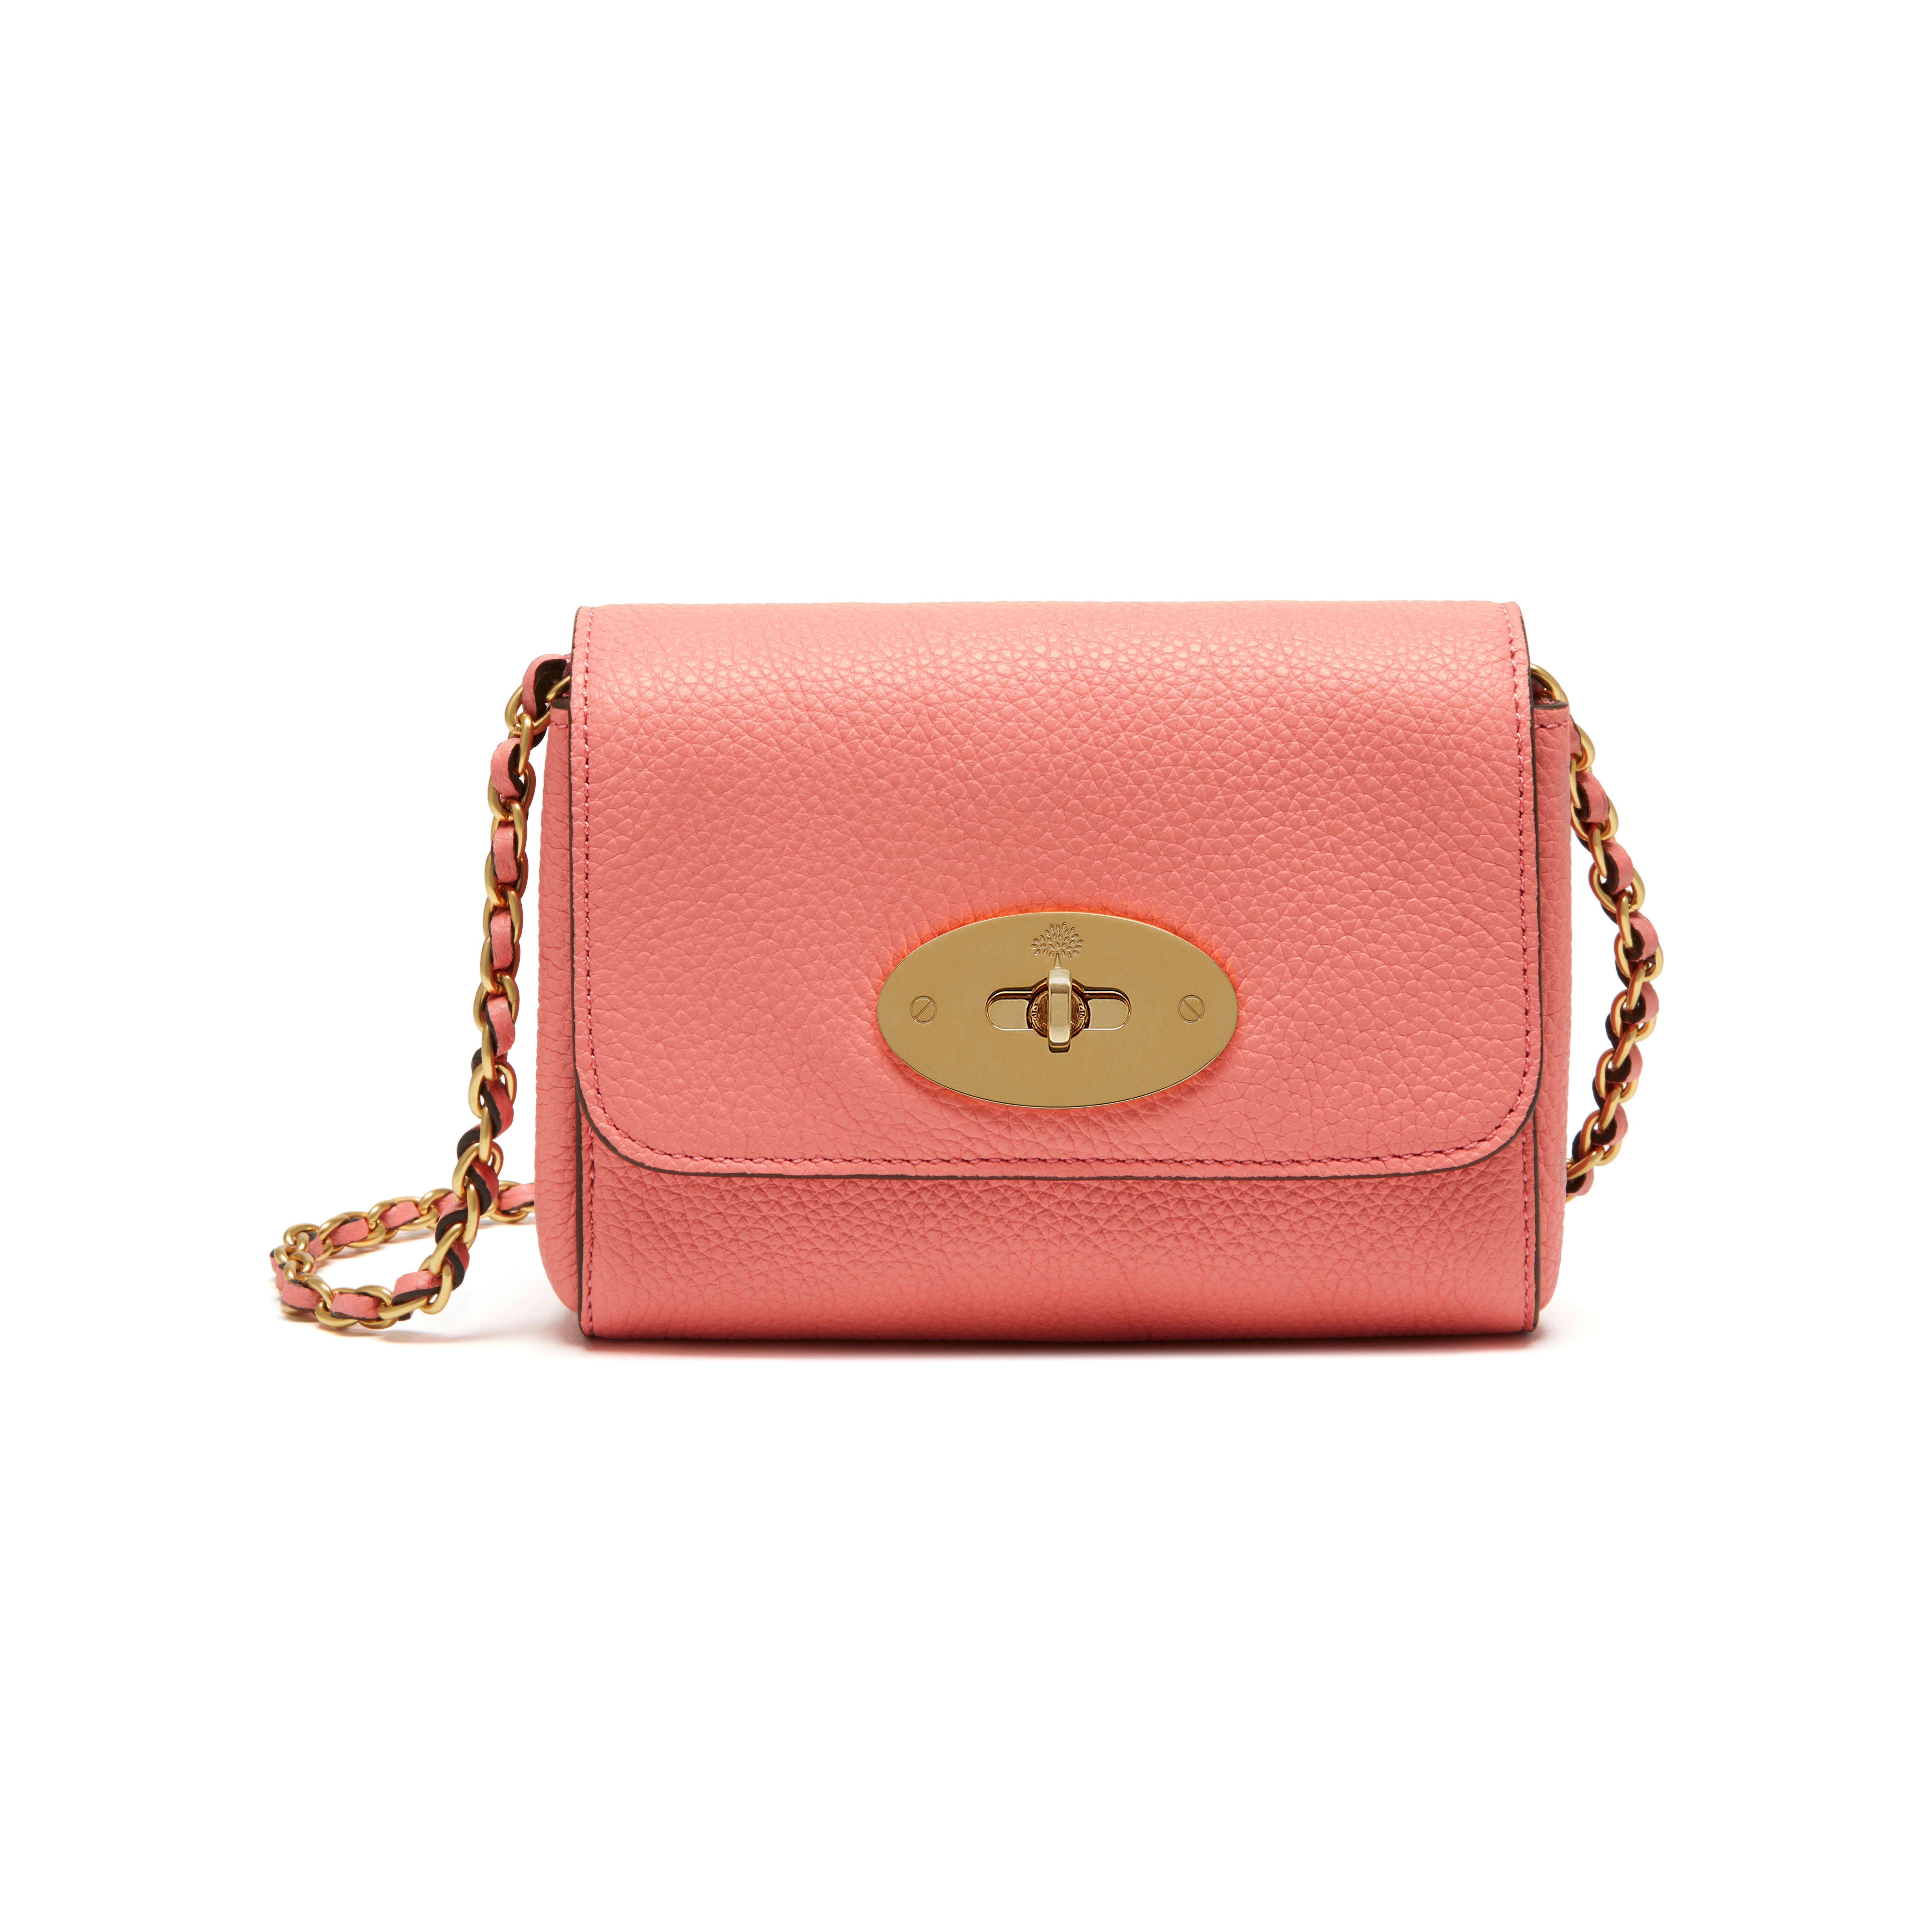 Lyst - Mulberry Mini Lily in Pink